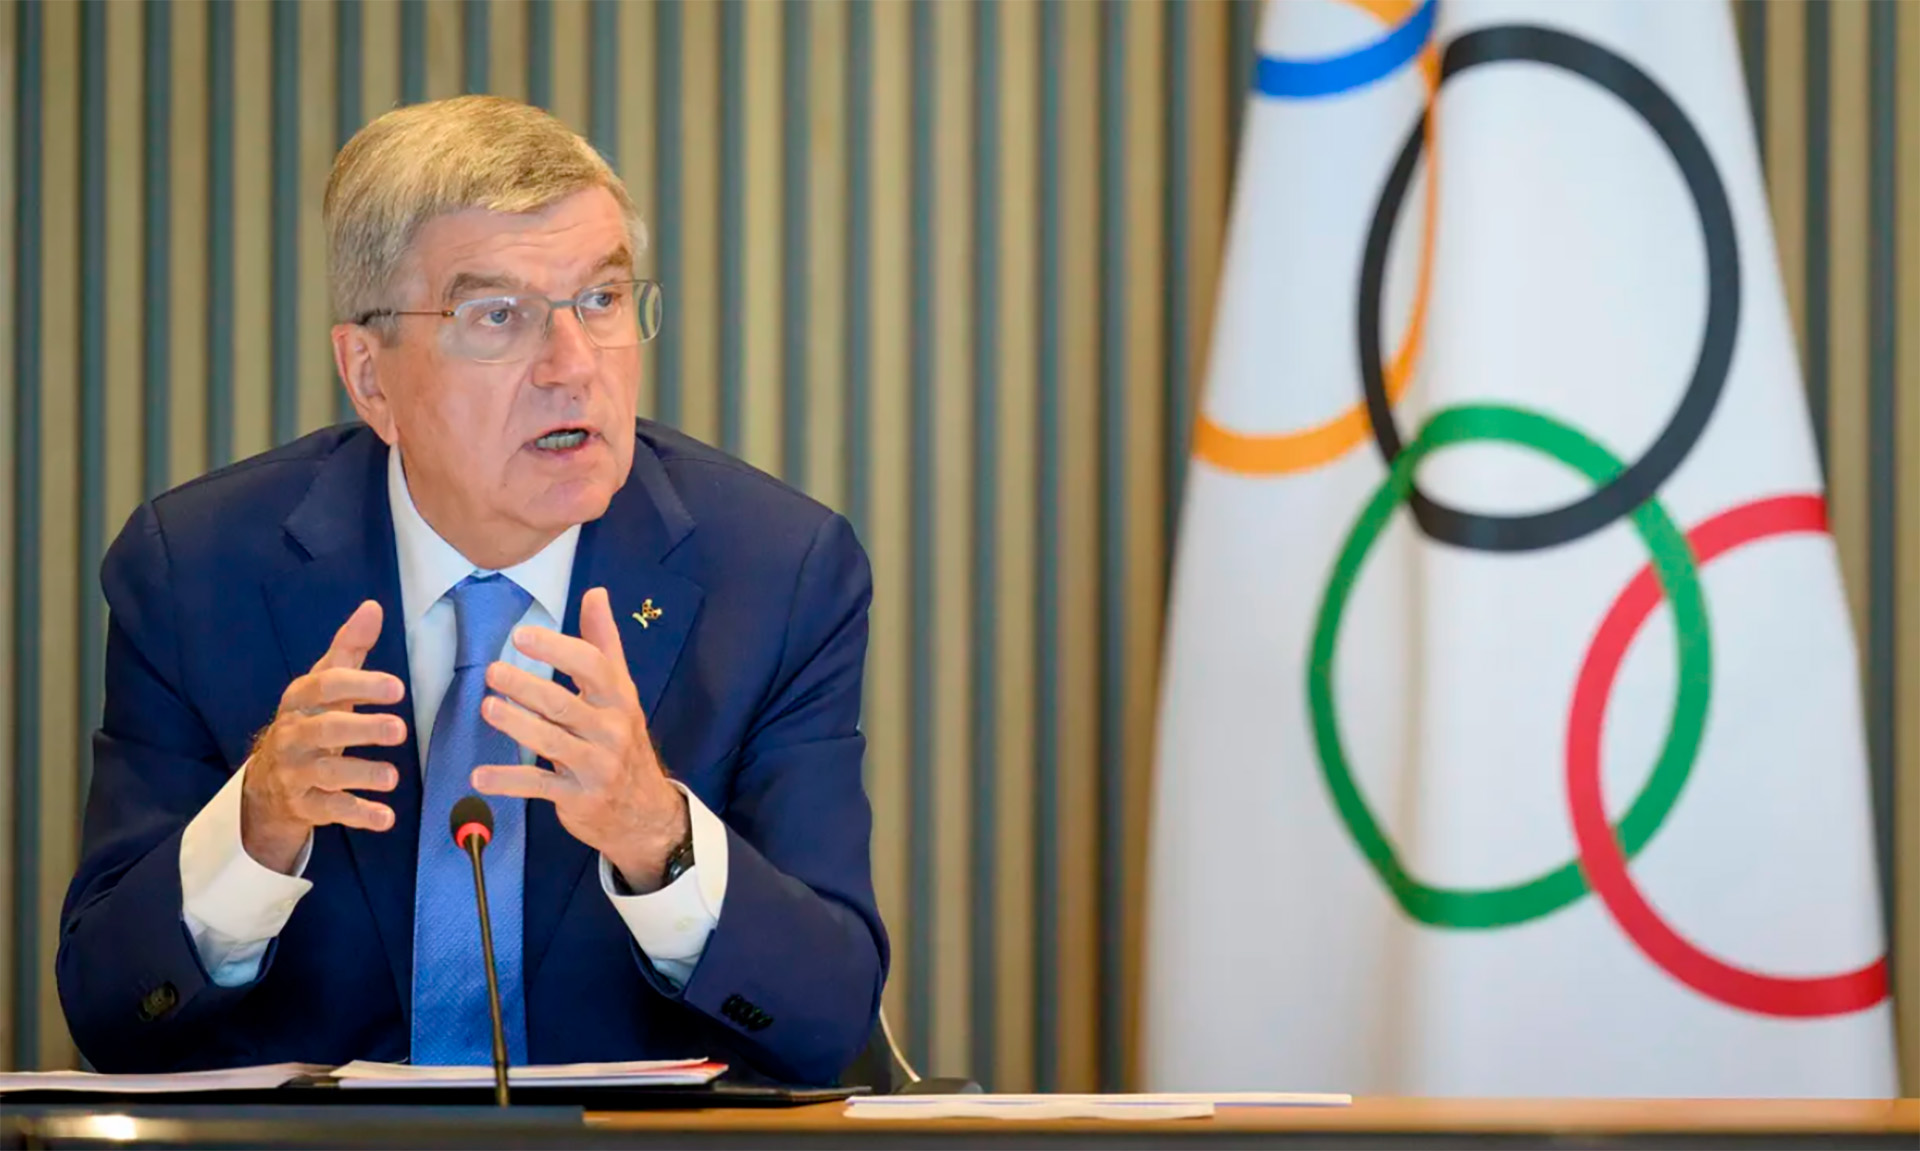 Thomas Bach speaks during the meeting of the IOC Executive Committee in Lausanne, Switzerland. Laurent Gillieron/Keystone via AP